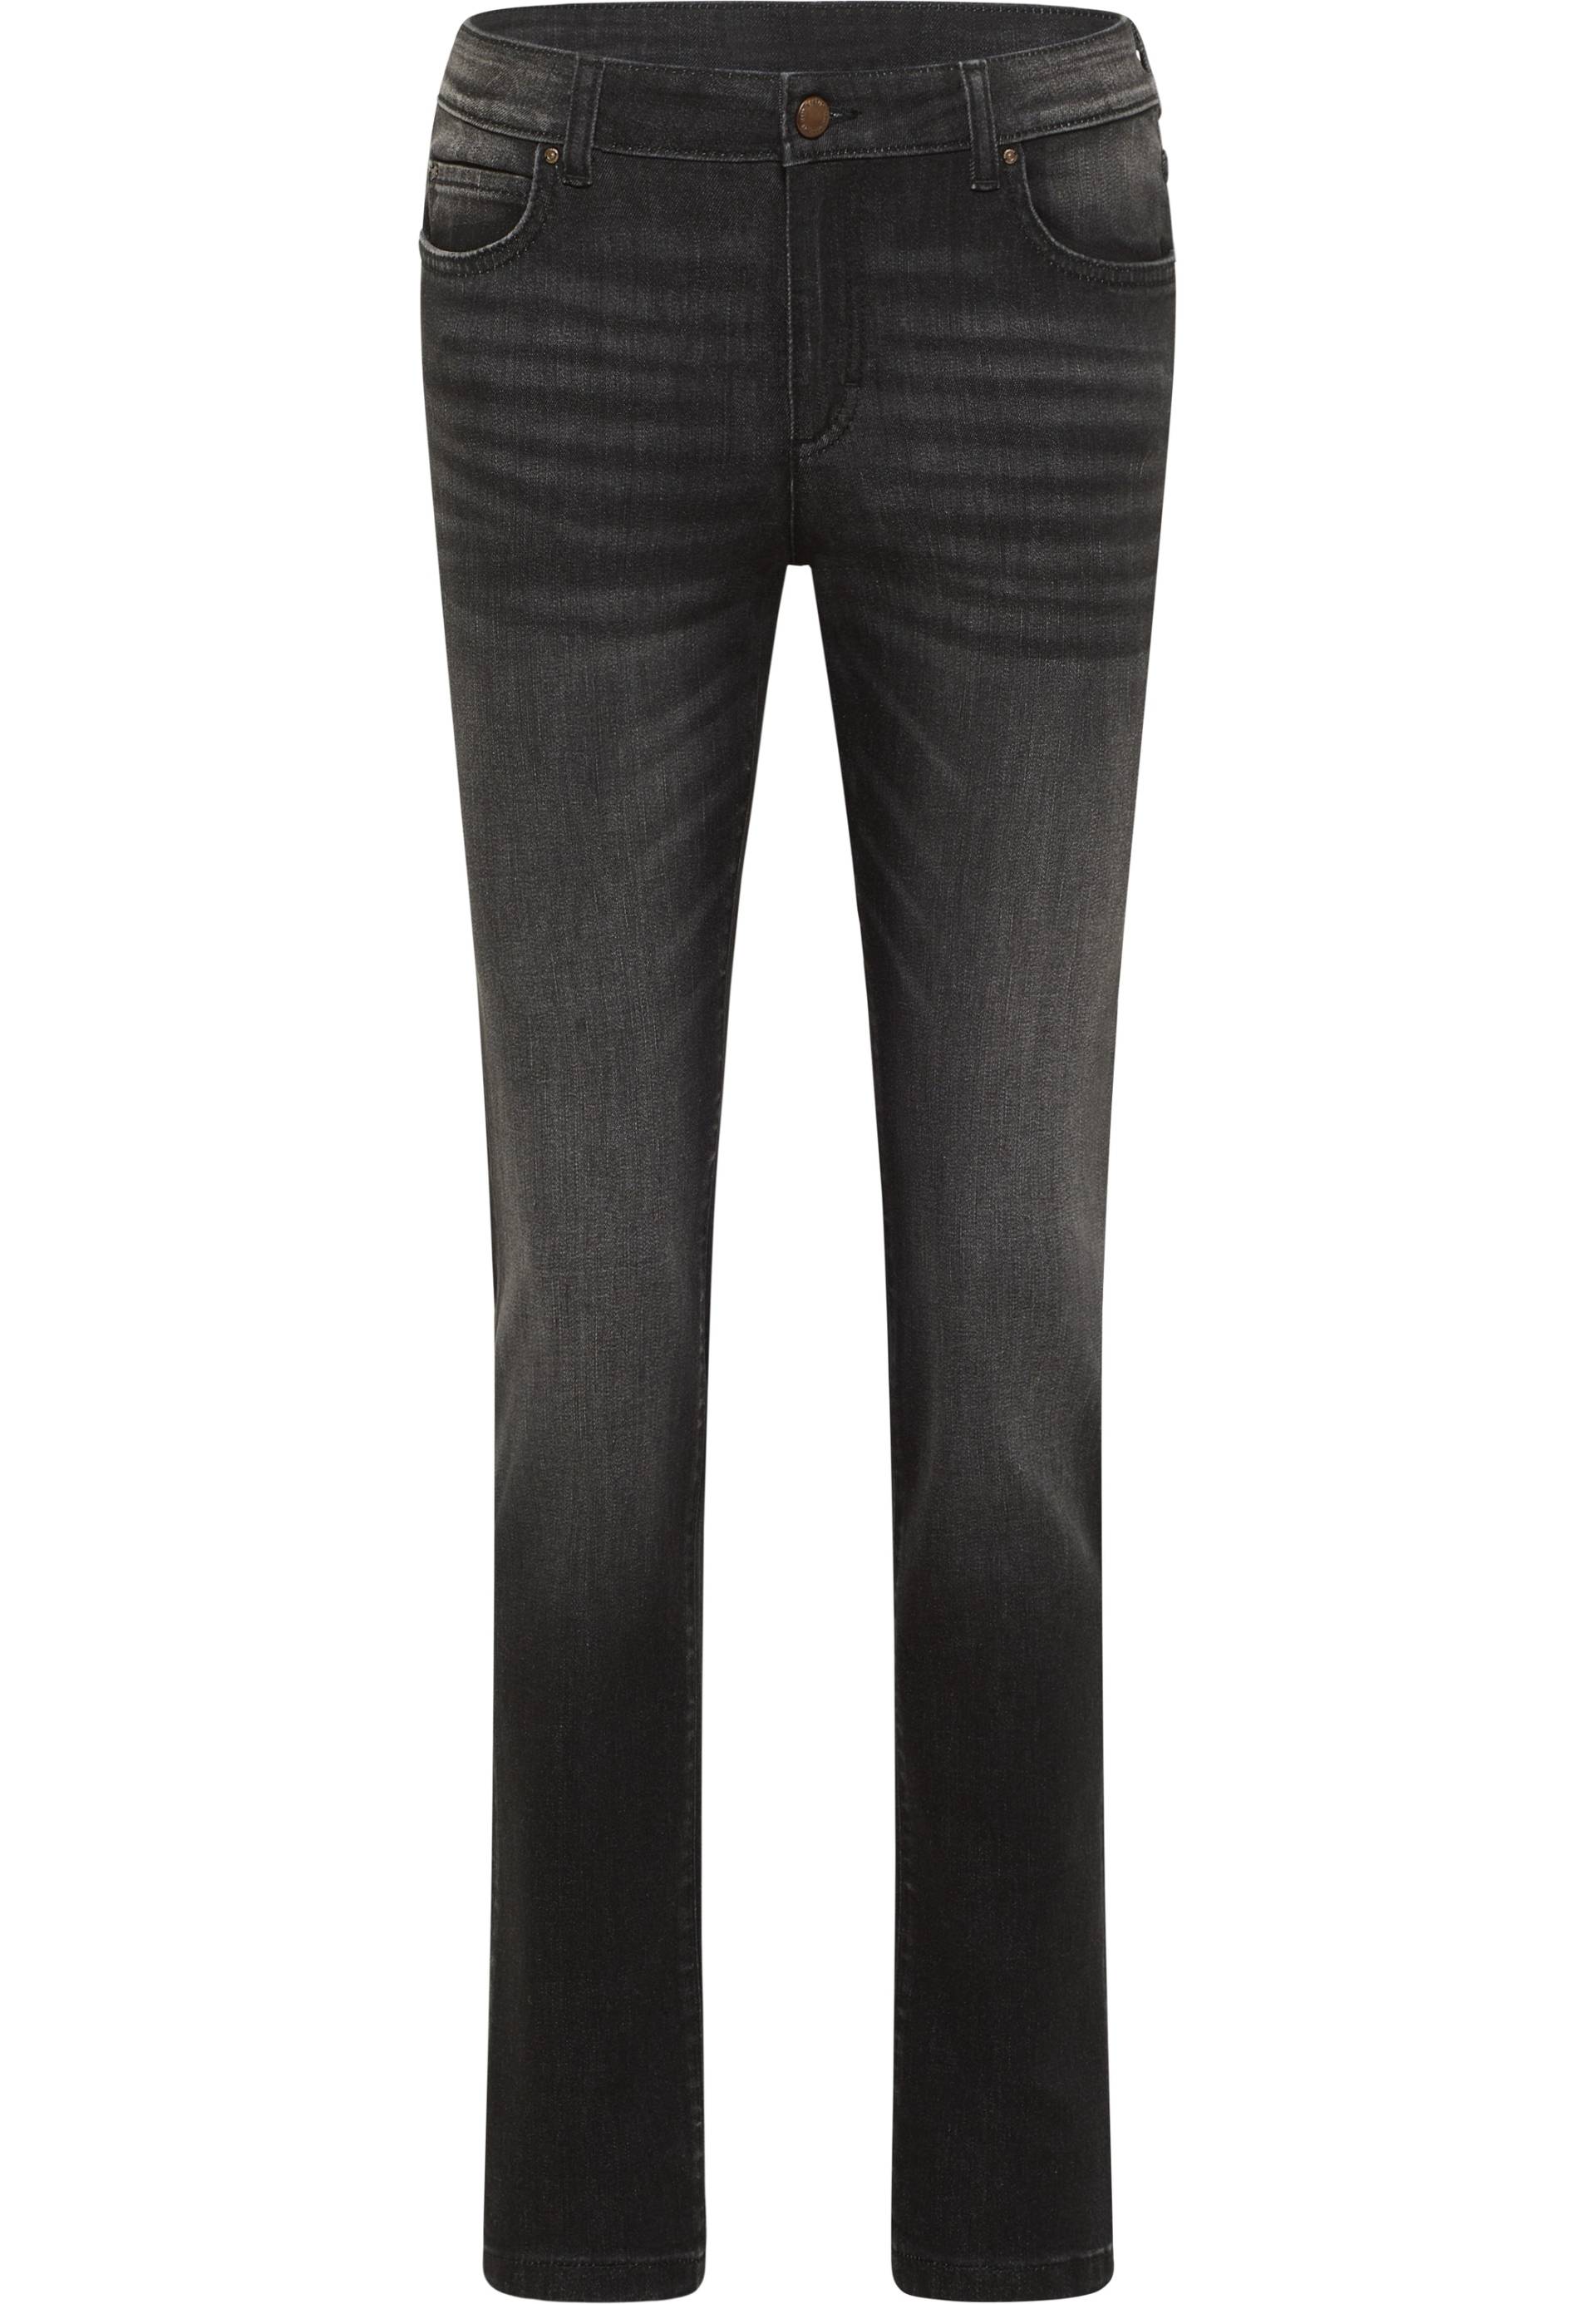 MUSTANG 5-Pocket-Hose »Crosby Relaxed Slim« von mustang